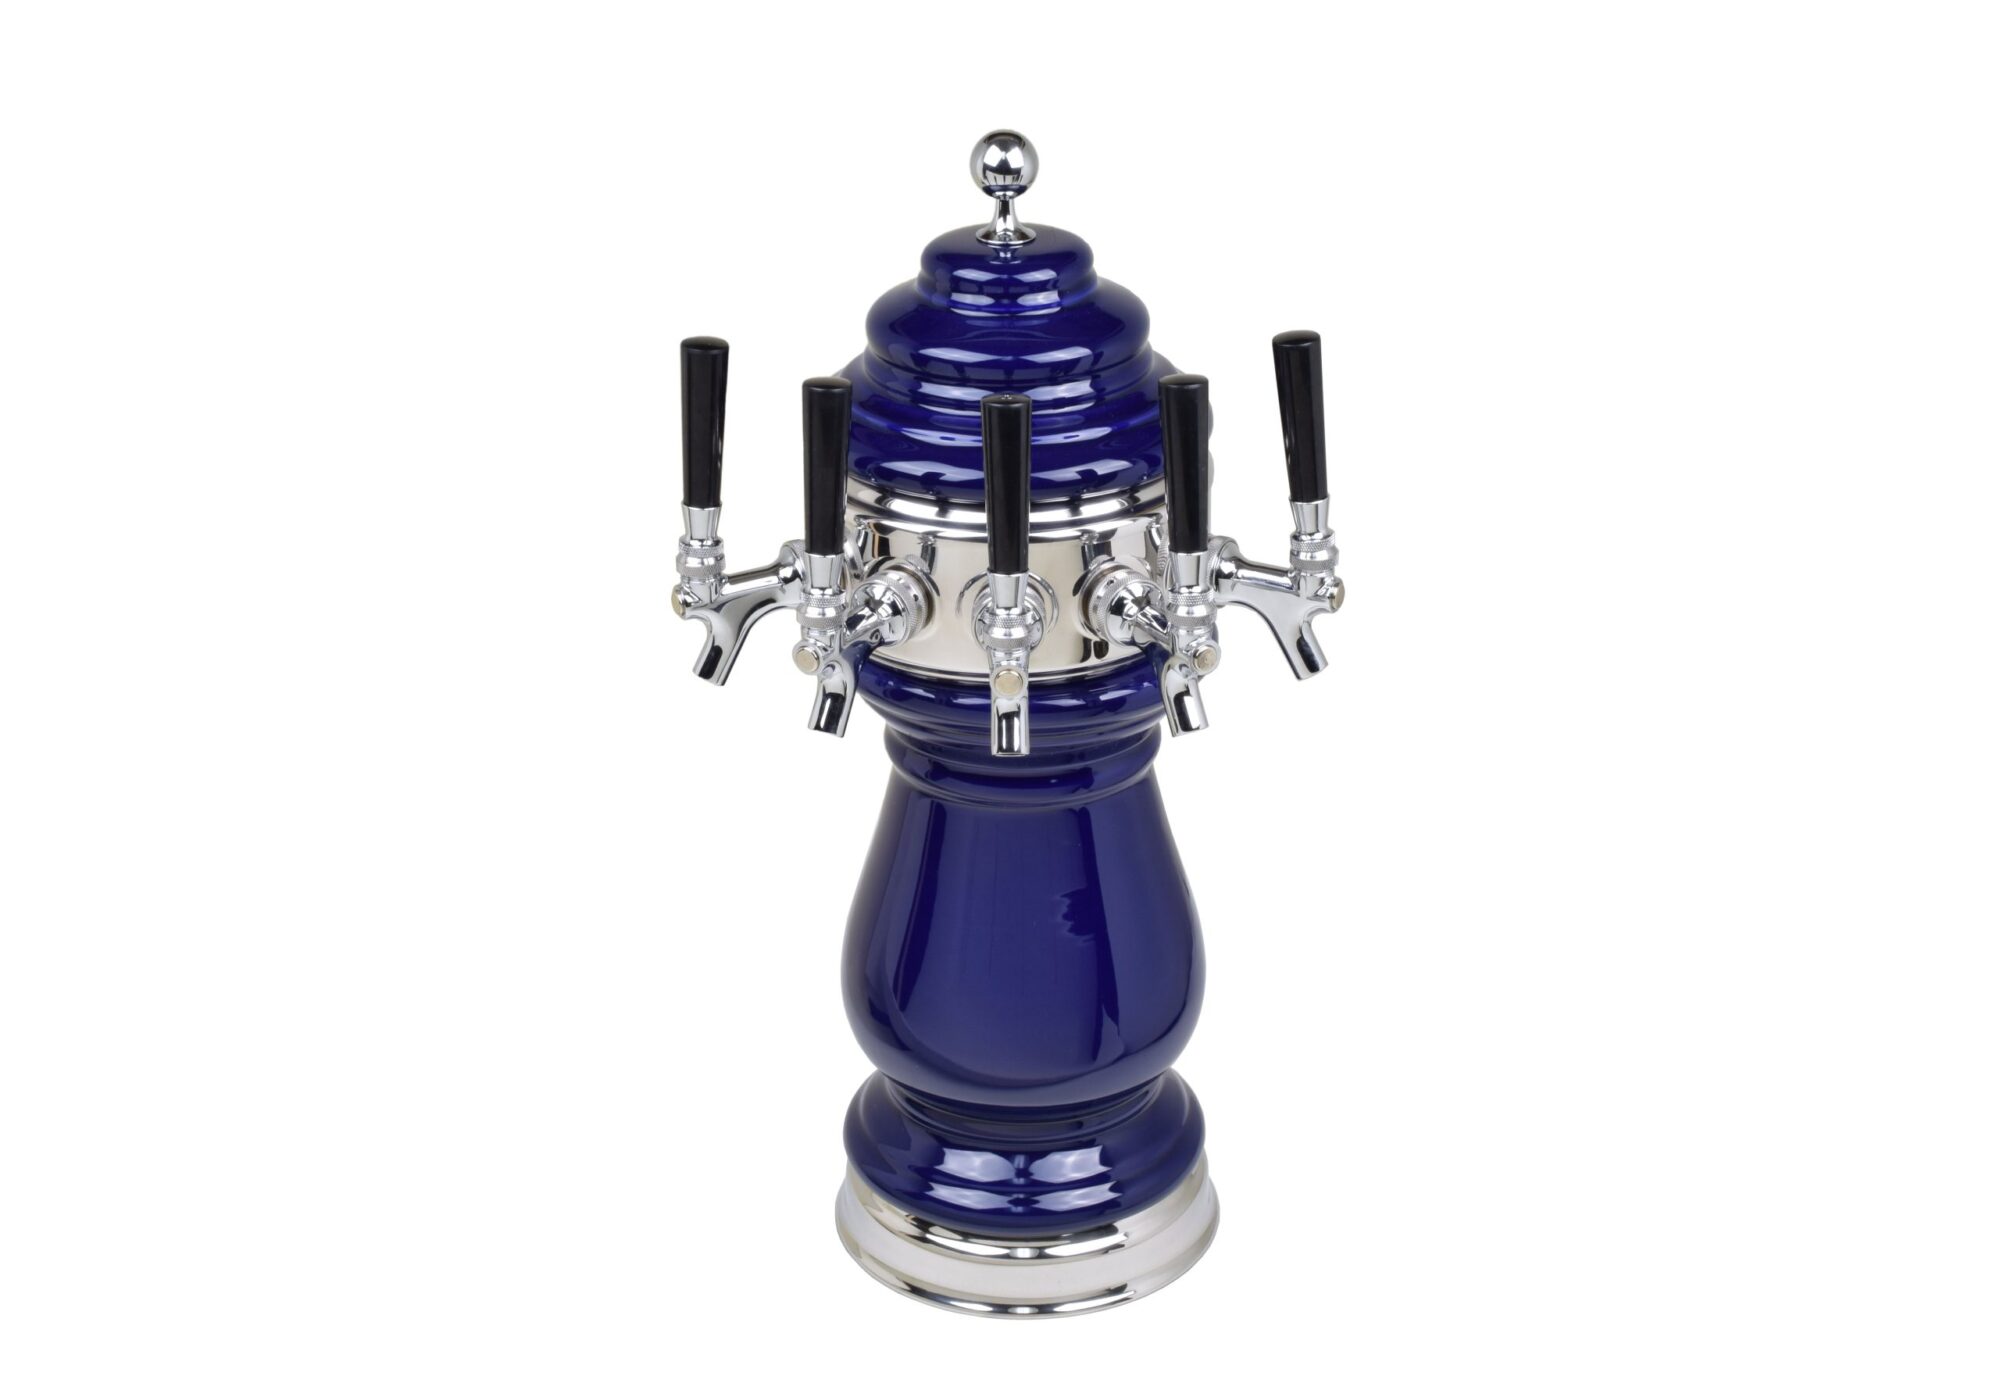 882C-5BL Five Faucet Ceramic Tower with Chrome Plated Hardware - Available in 5 Colors - Shown in Cobalt Blue